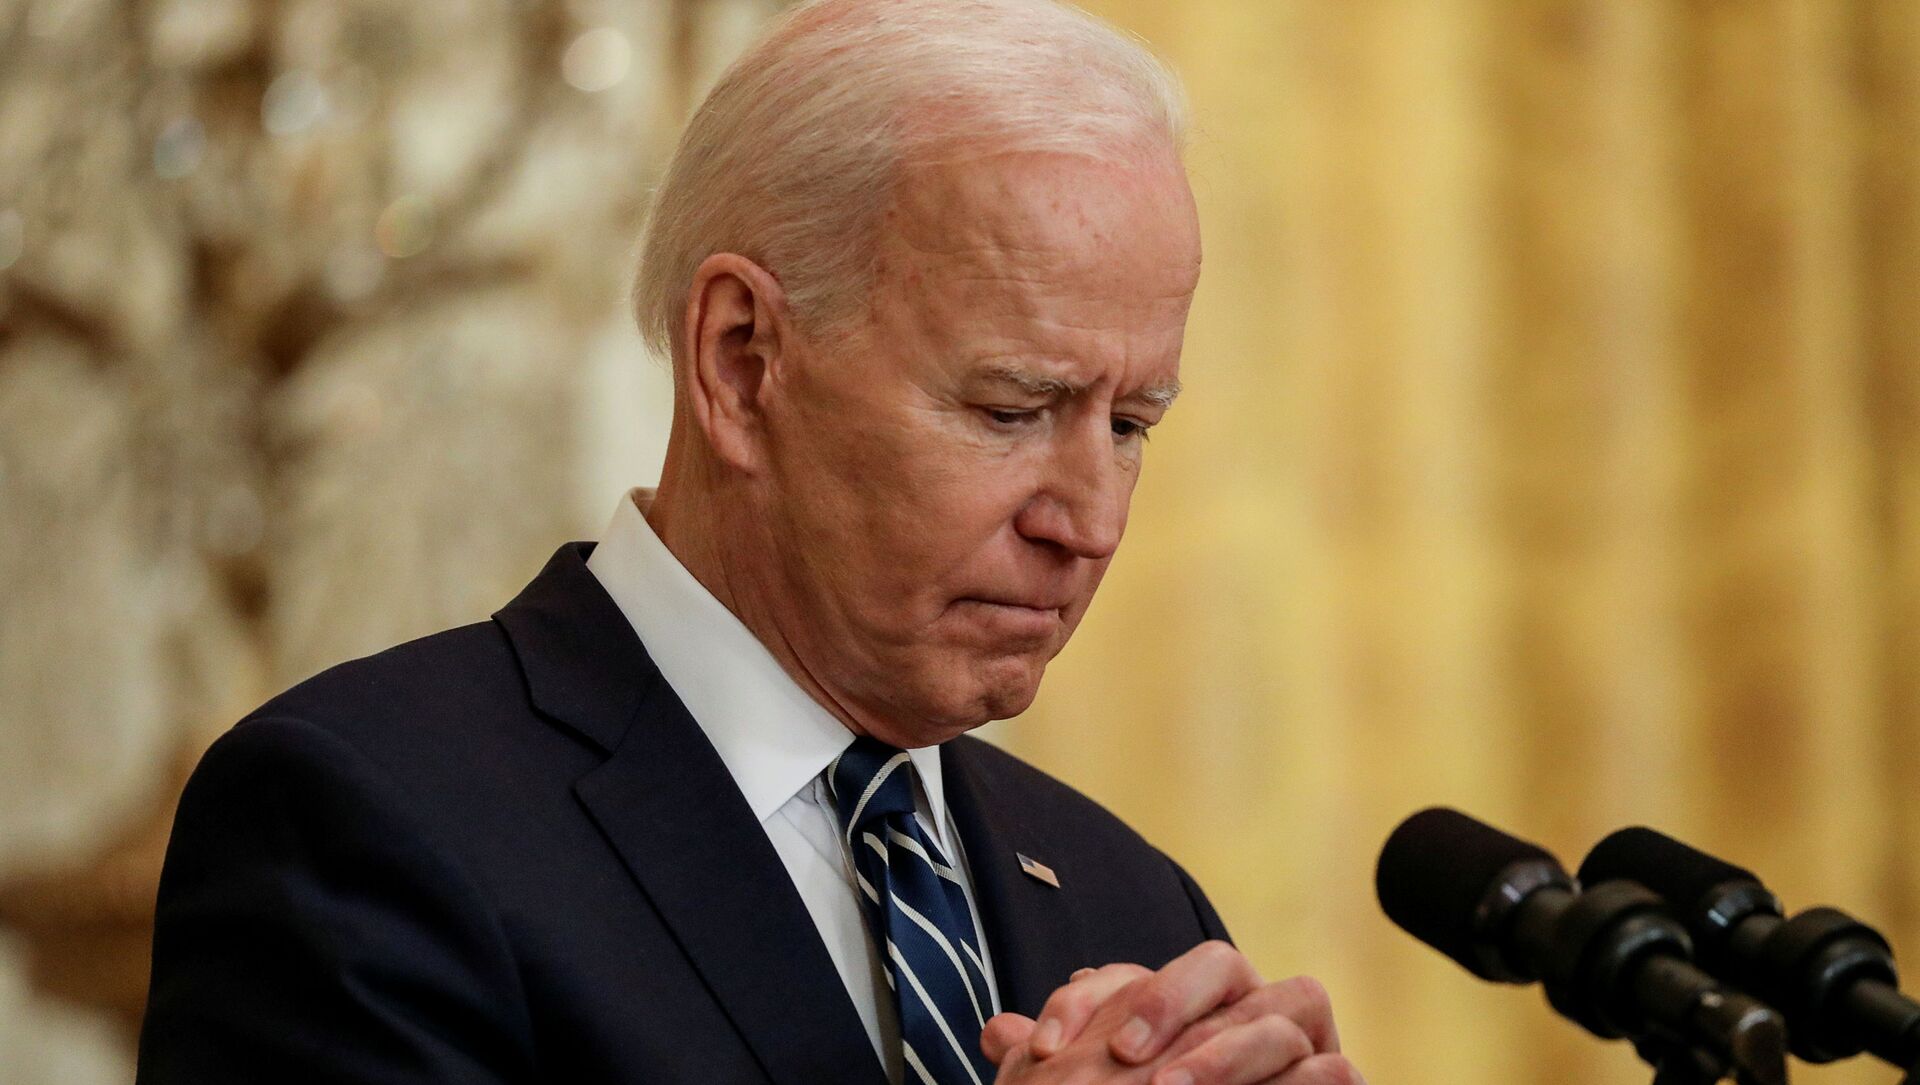 U.S. President Joe Biden clasps his hands as he holds his first formal news conference in the East Room of the White House in Washington, U.S., March 25, 2021 - Sputnik International, 1920, 26.03.2021